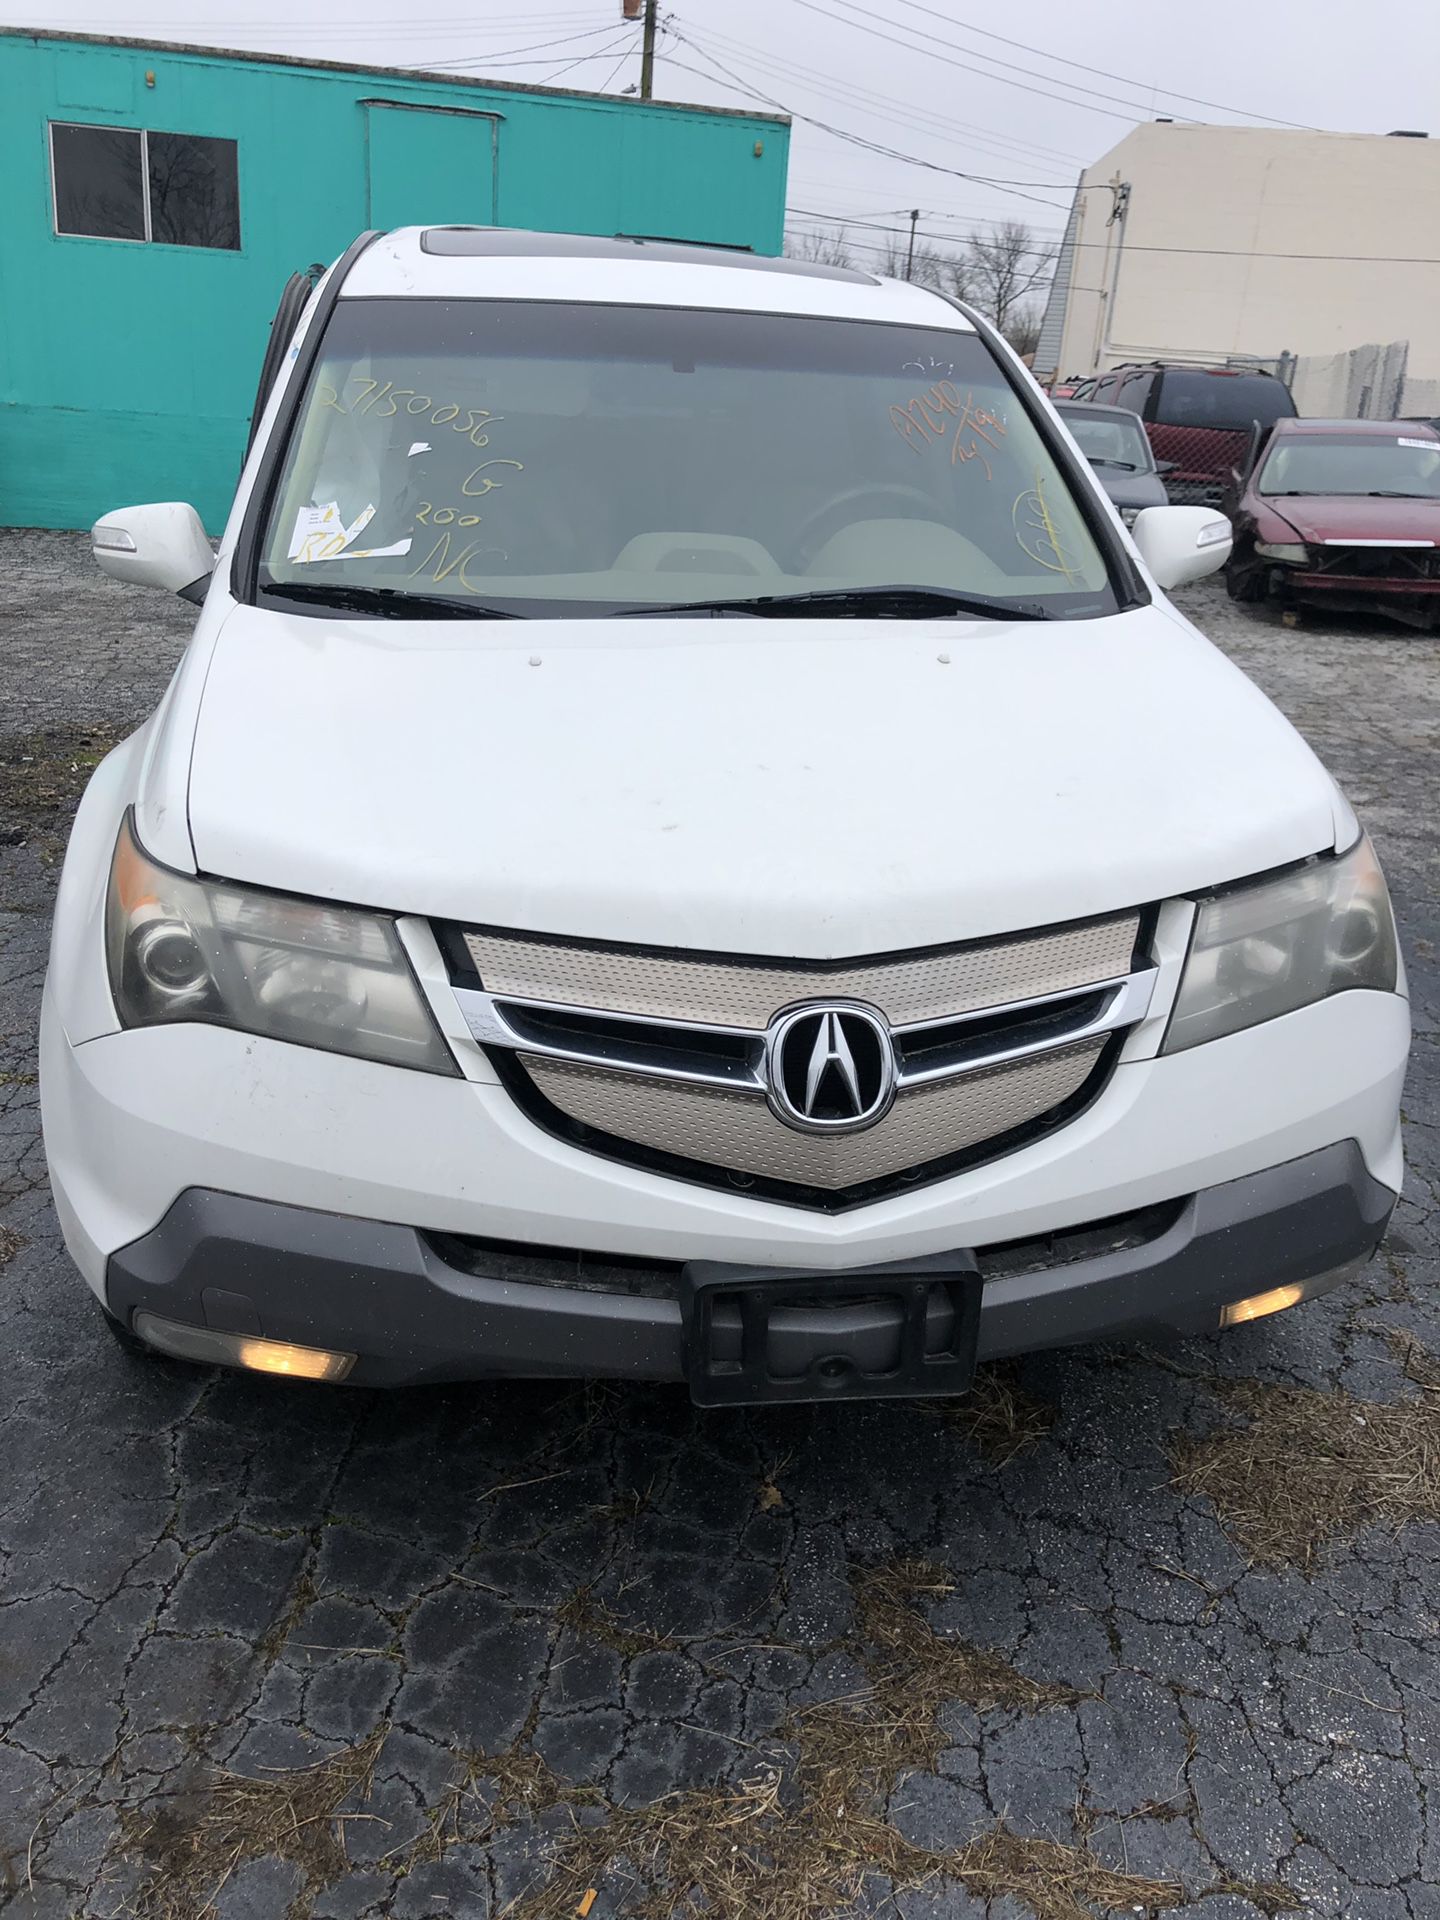 2008 Acura MDX for part only